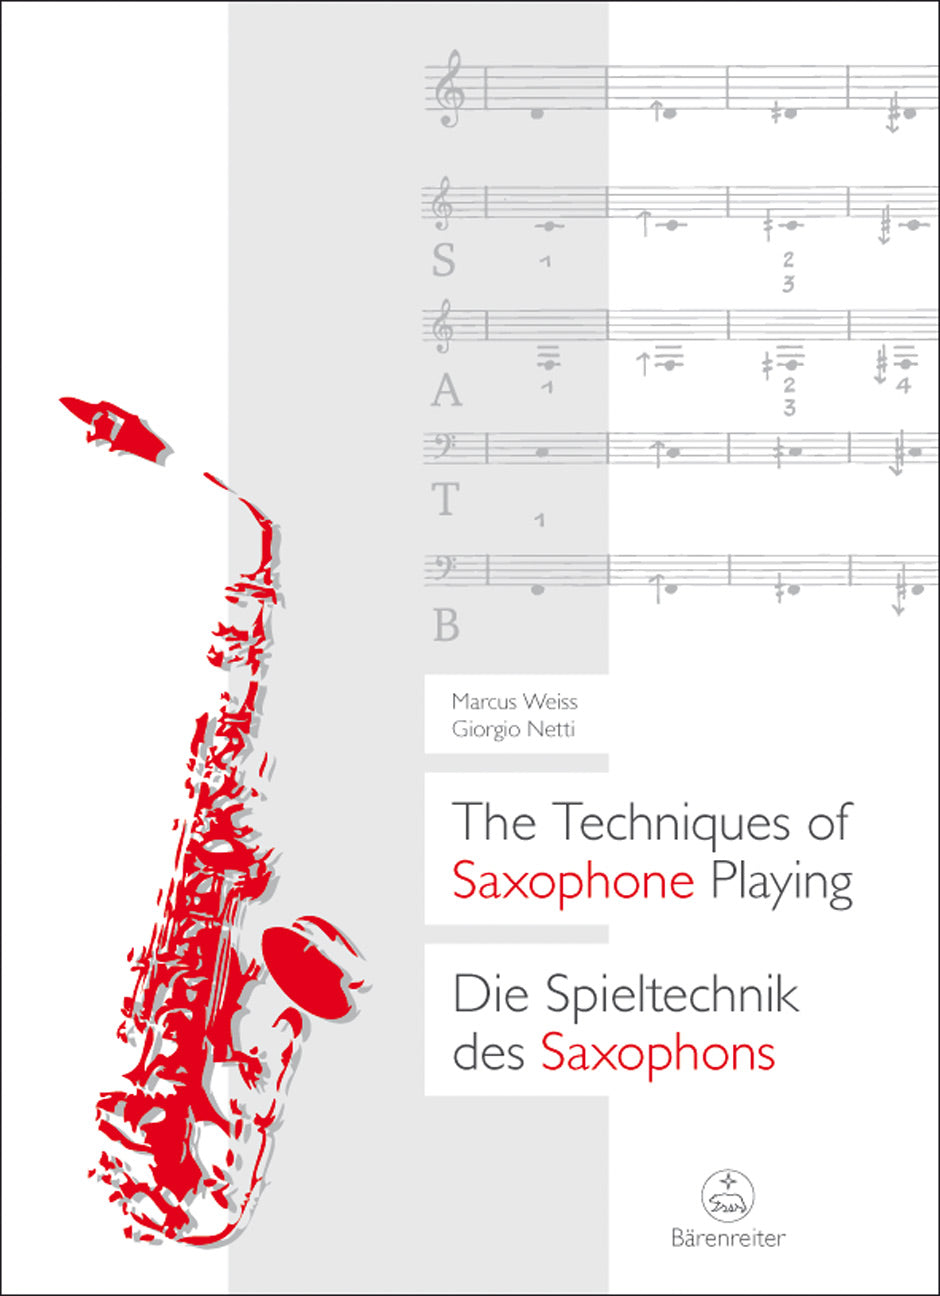 The Techniques of Saxophone Playing